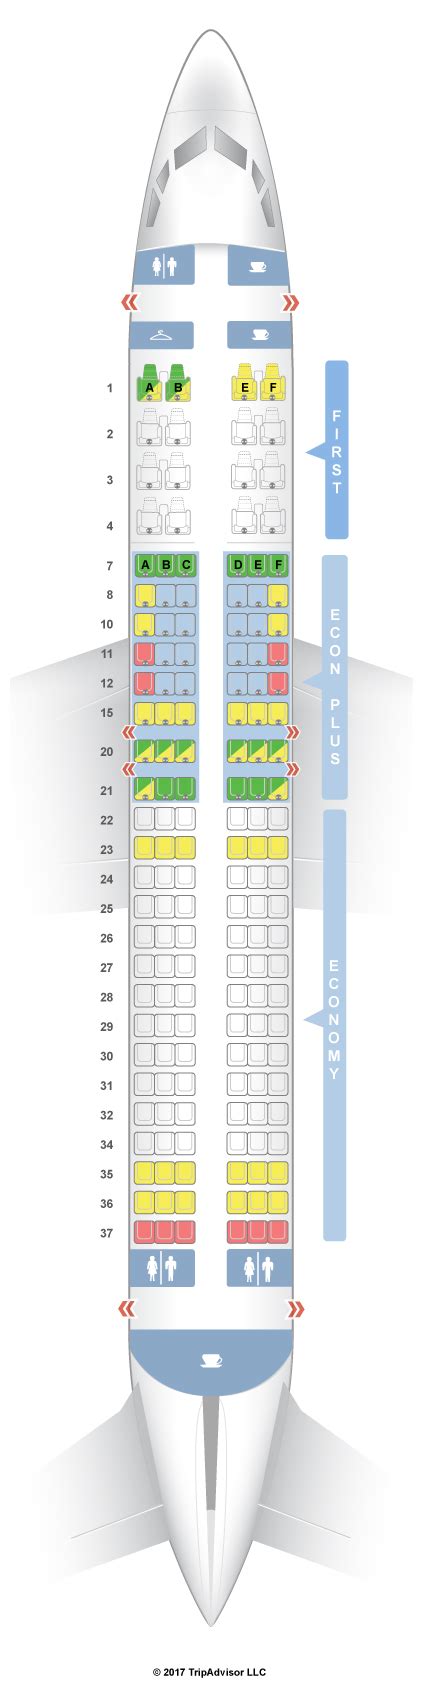 boeing 737-800 seating chart united